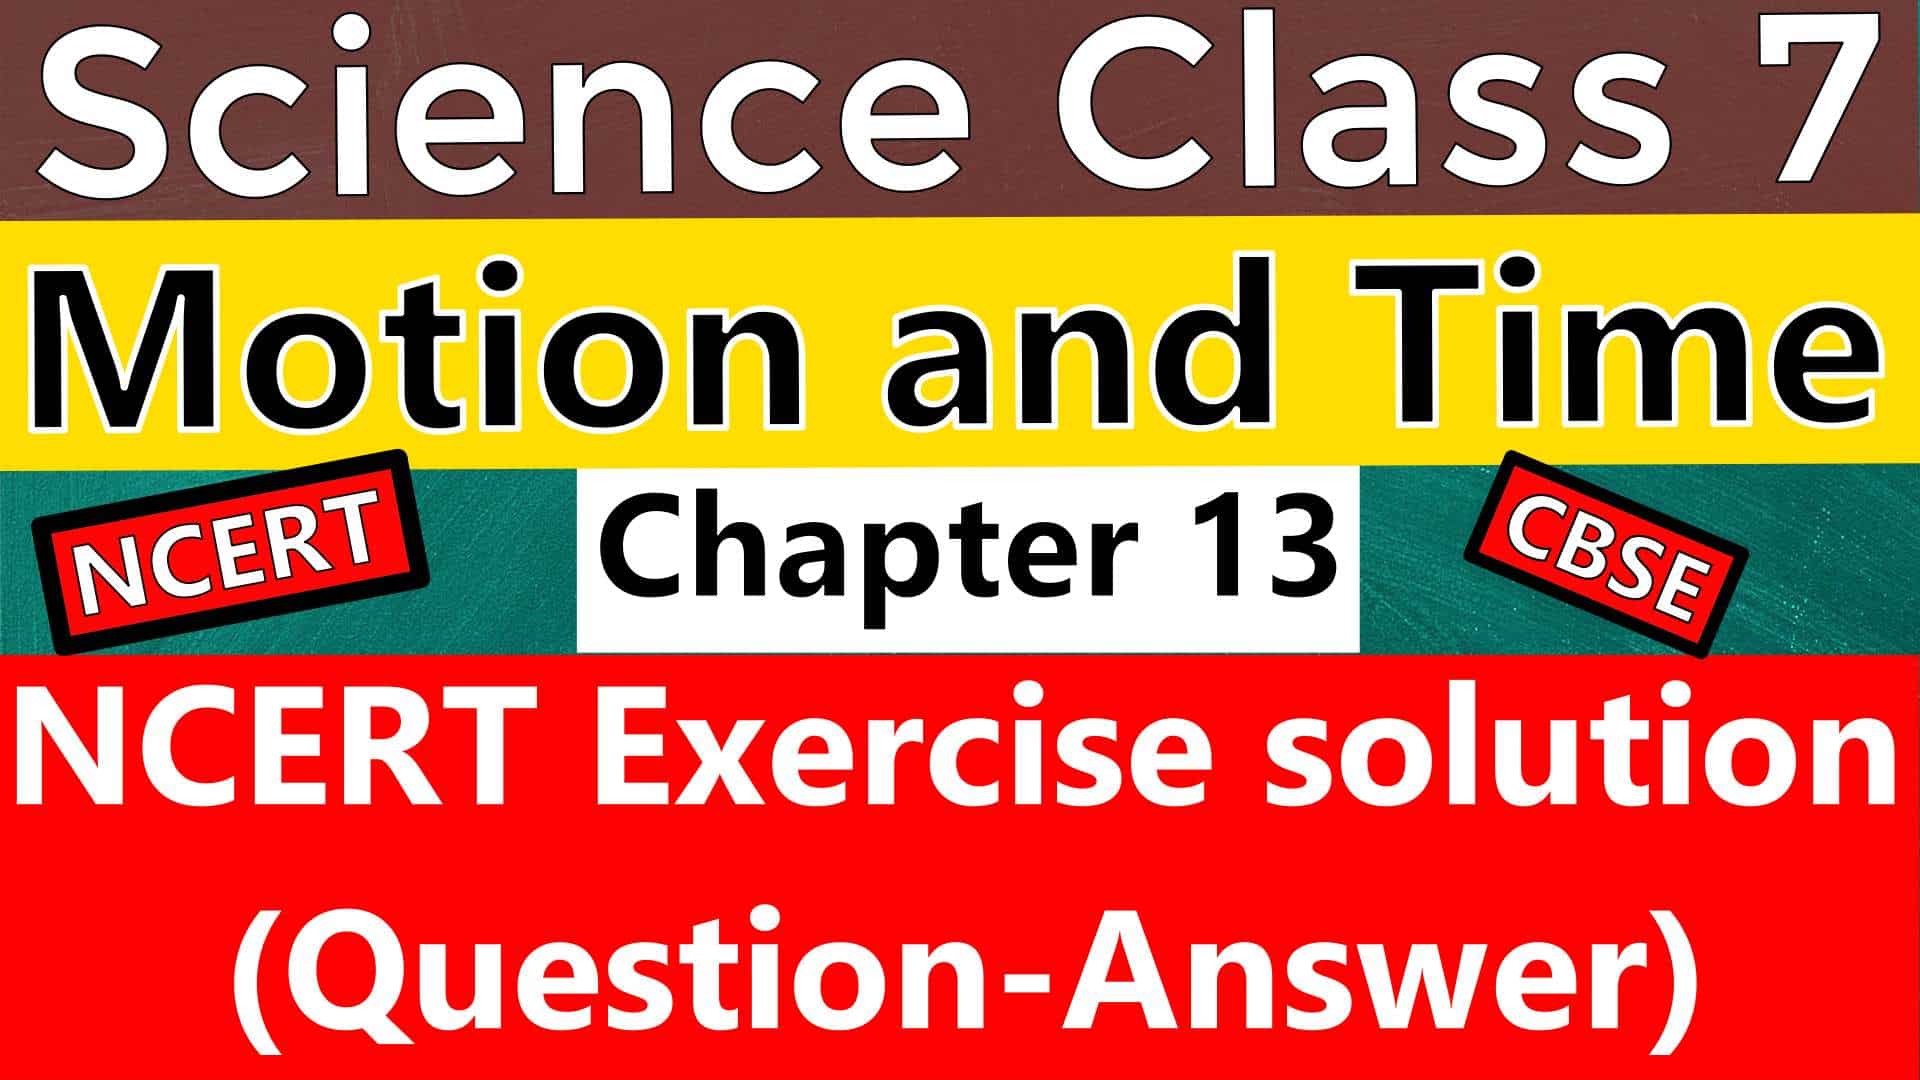 Science Class 7 Chapter 12 Reproduction in Plants - NCERT Exercise Solutions (Question-Answer)